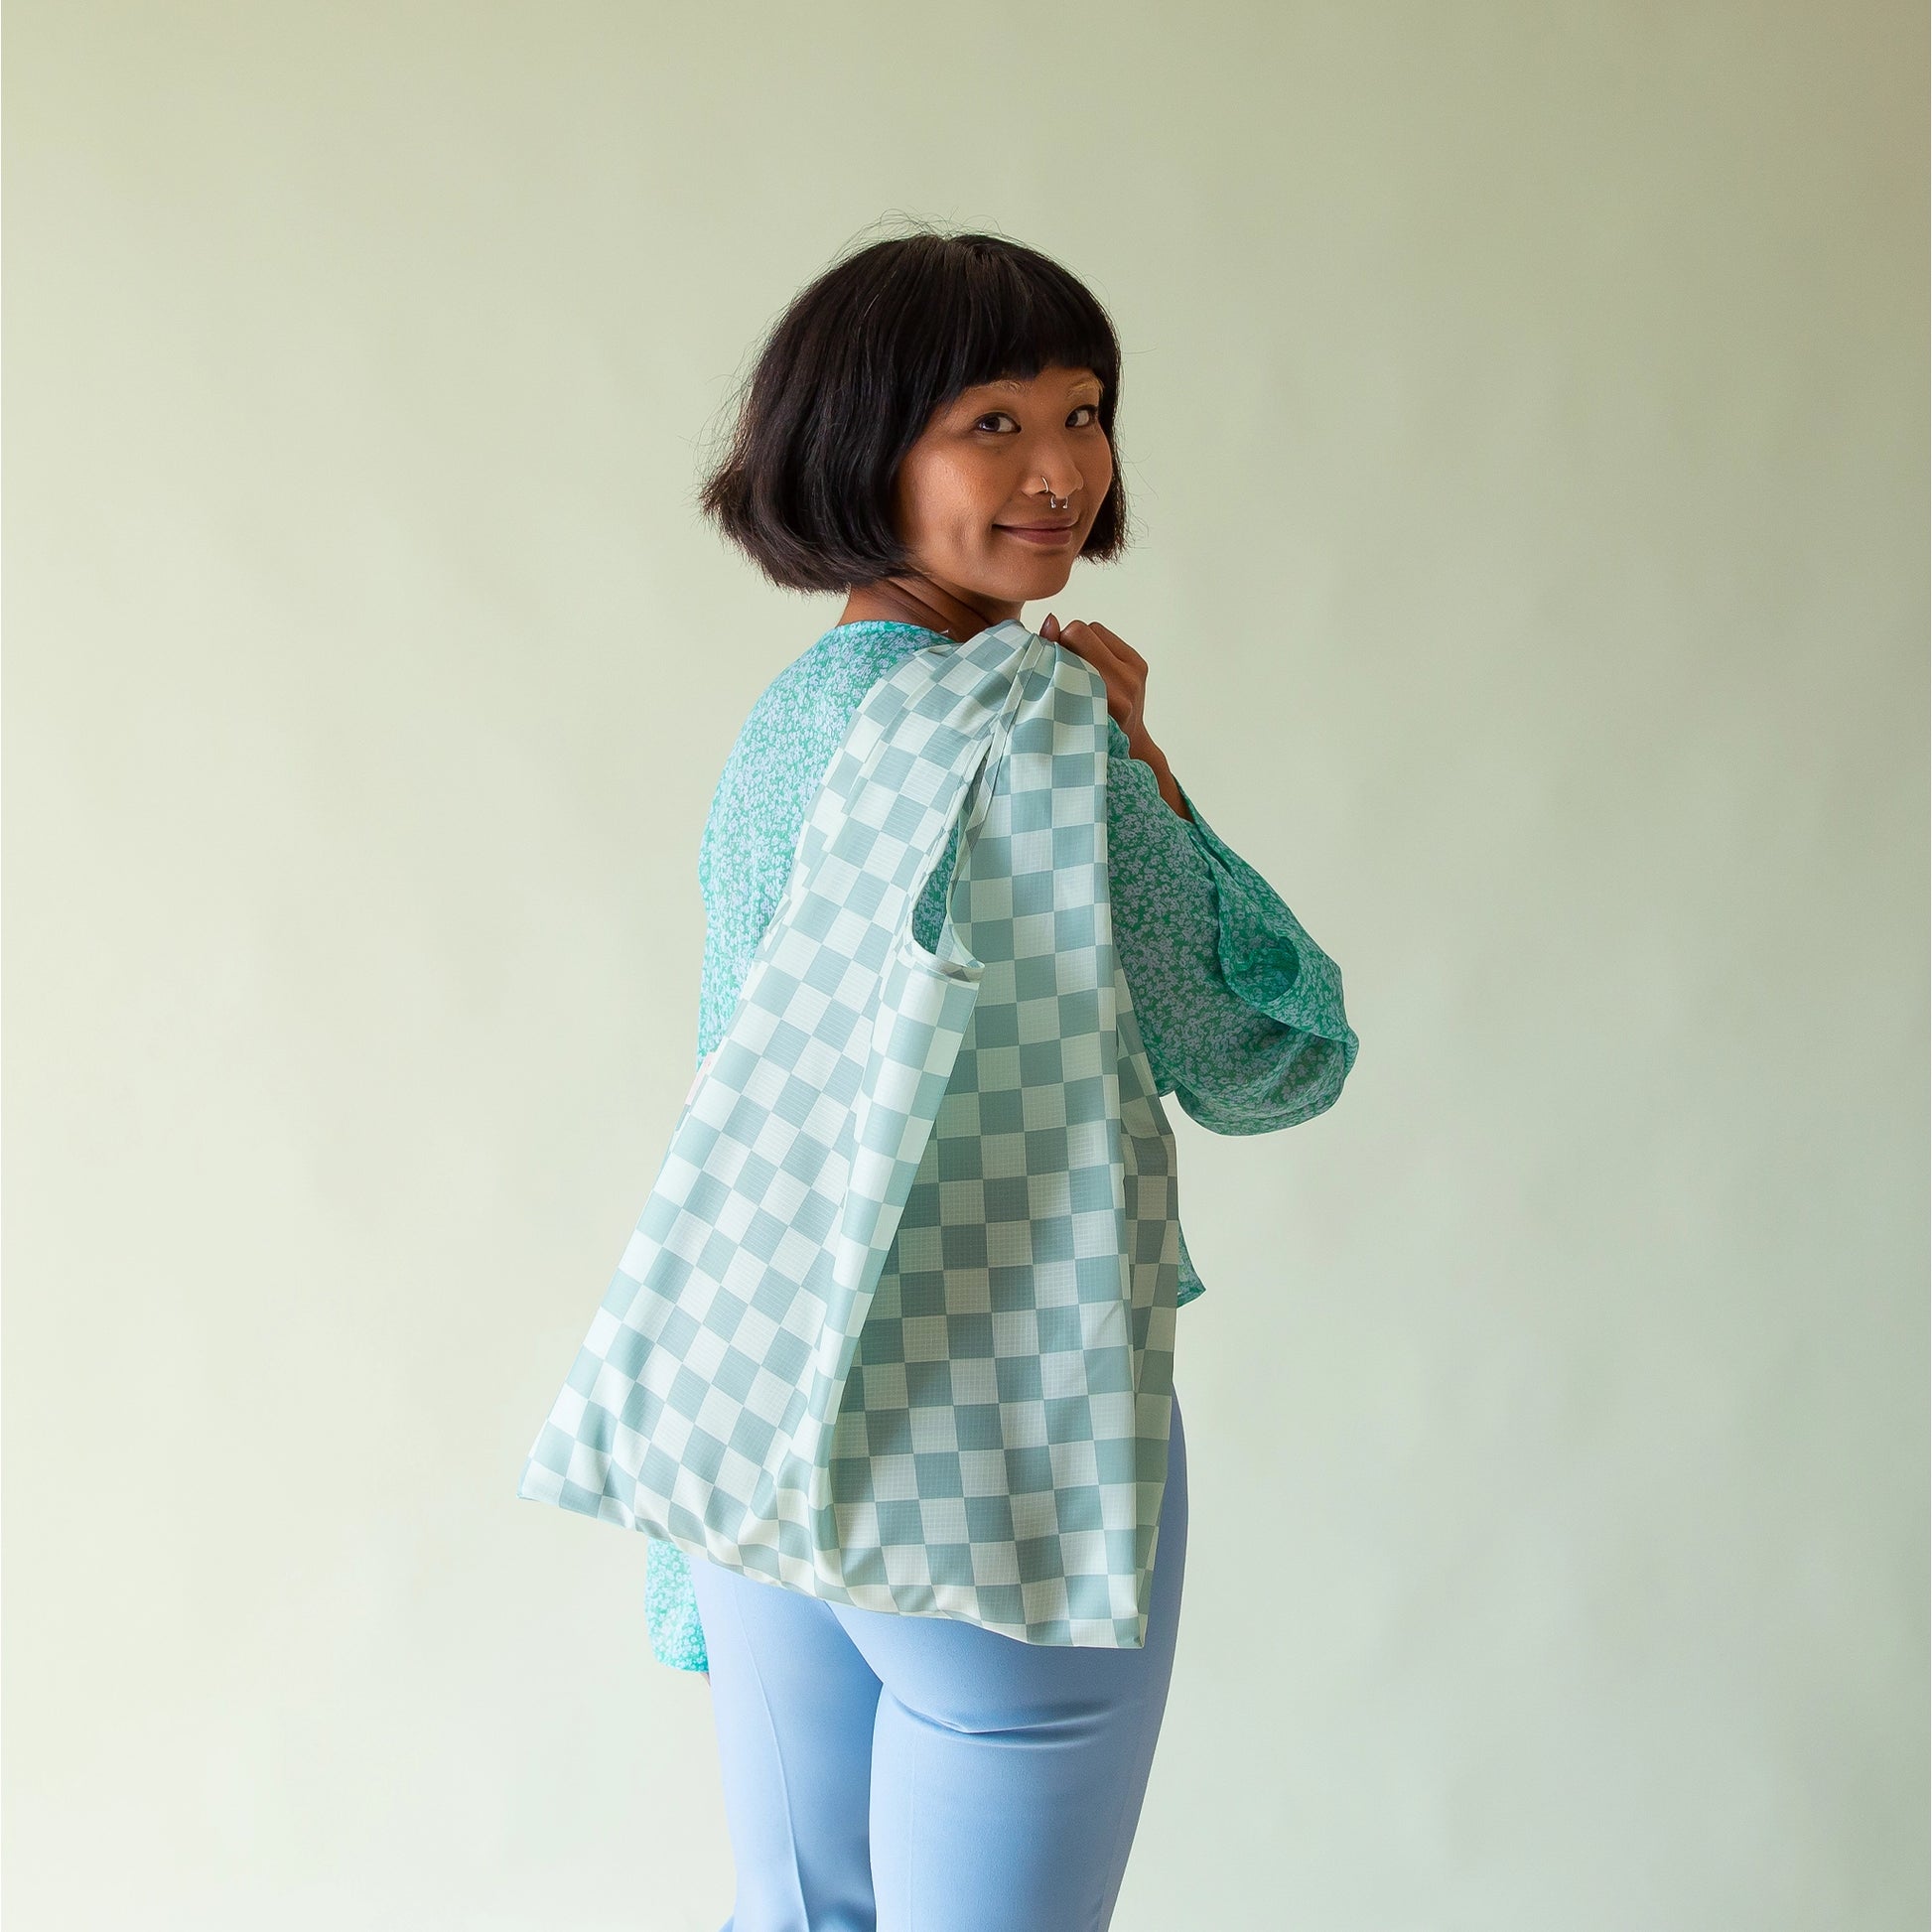 On a light green background is a model holding an aqua colored nylon tote with a checkered print all over.